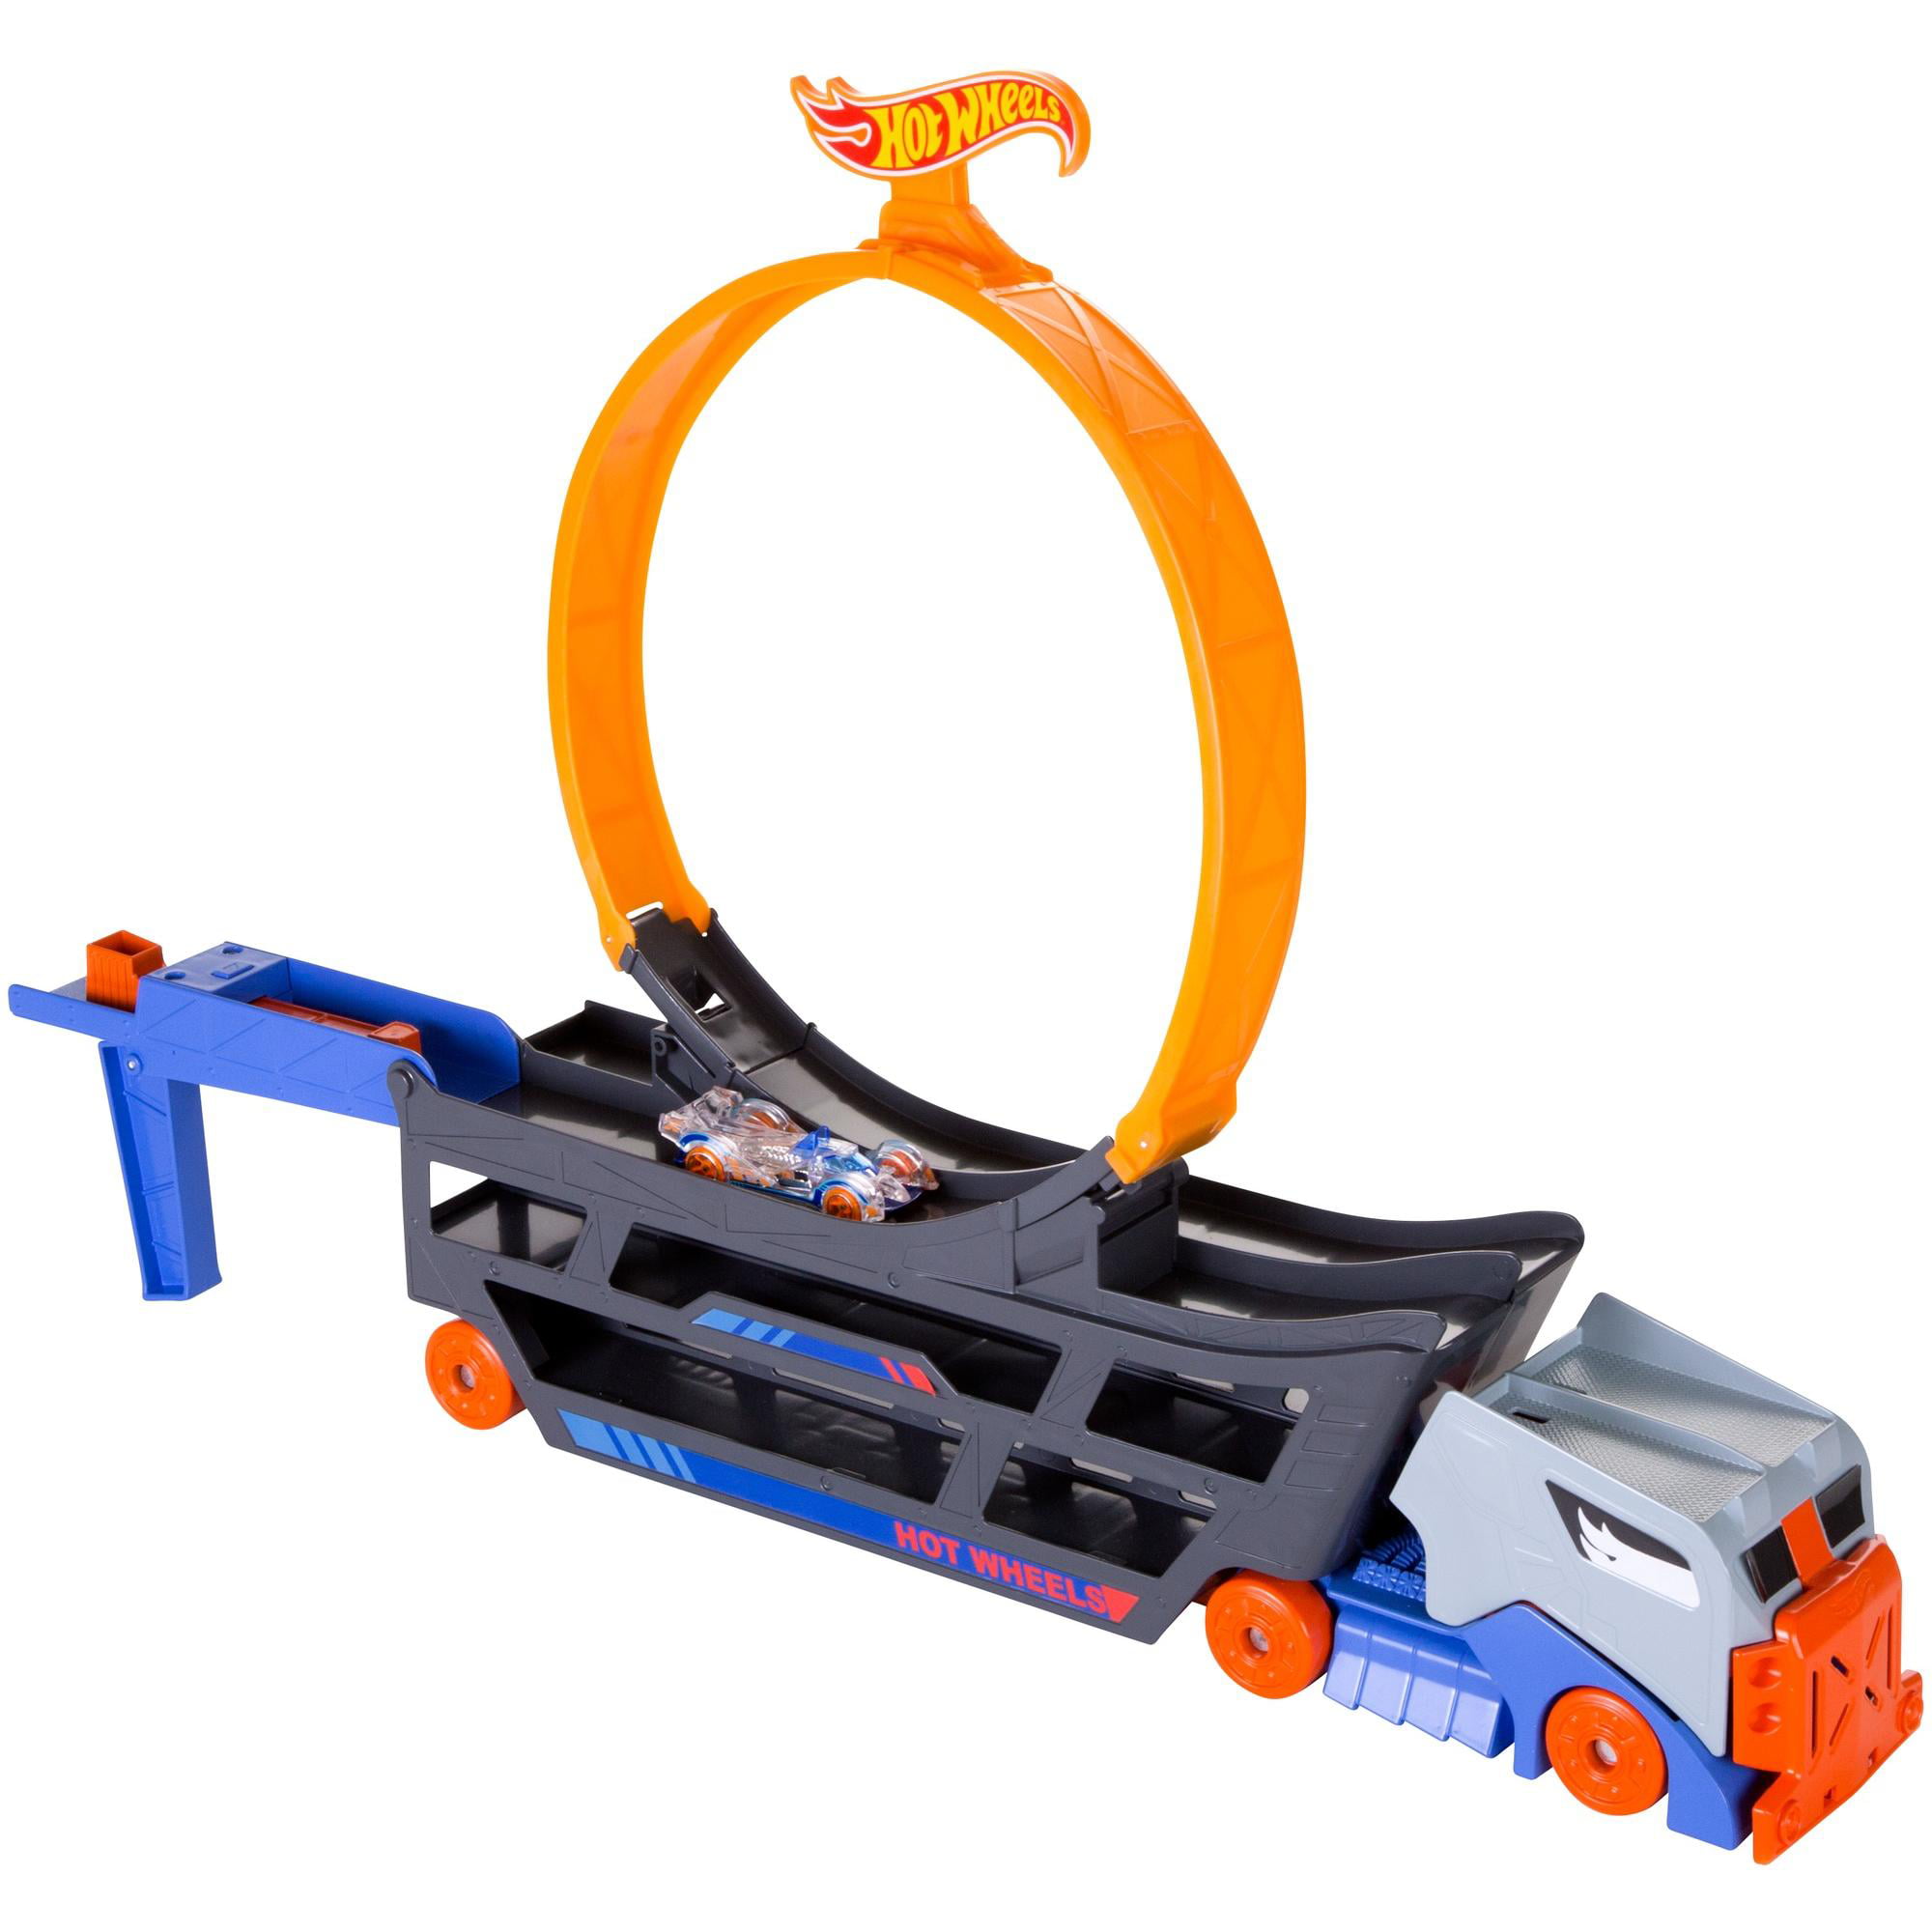 Hot Wheels Stunt and Go Truck Includes one Hot Wheels Car 